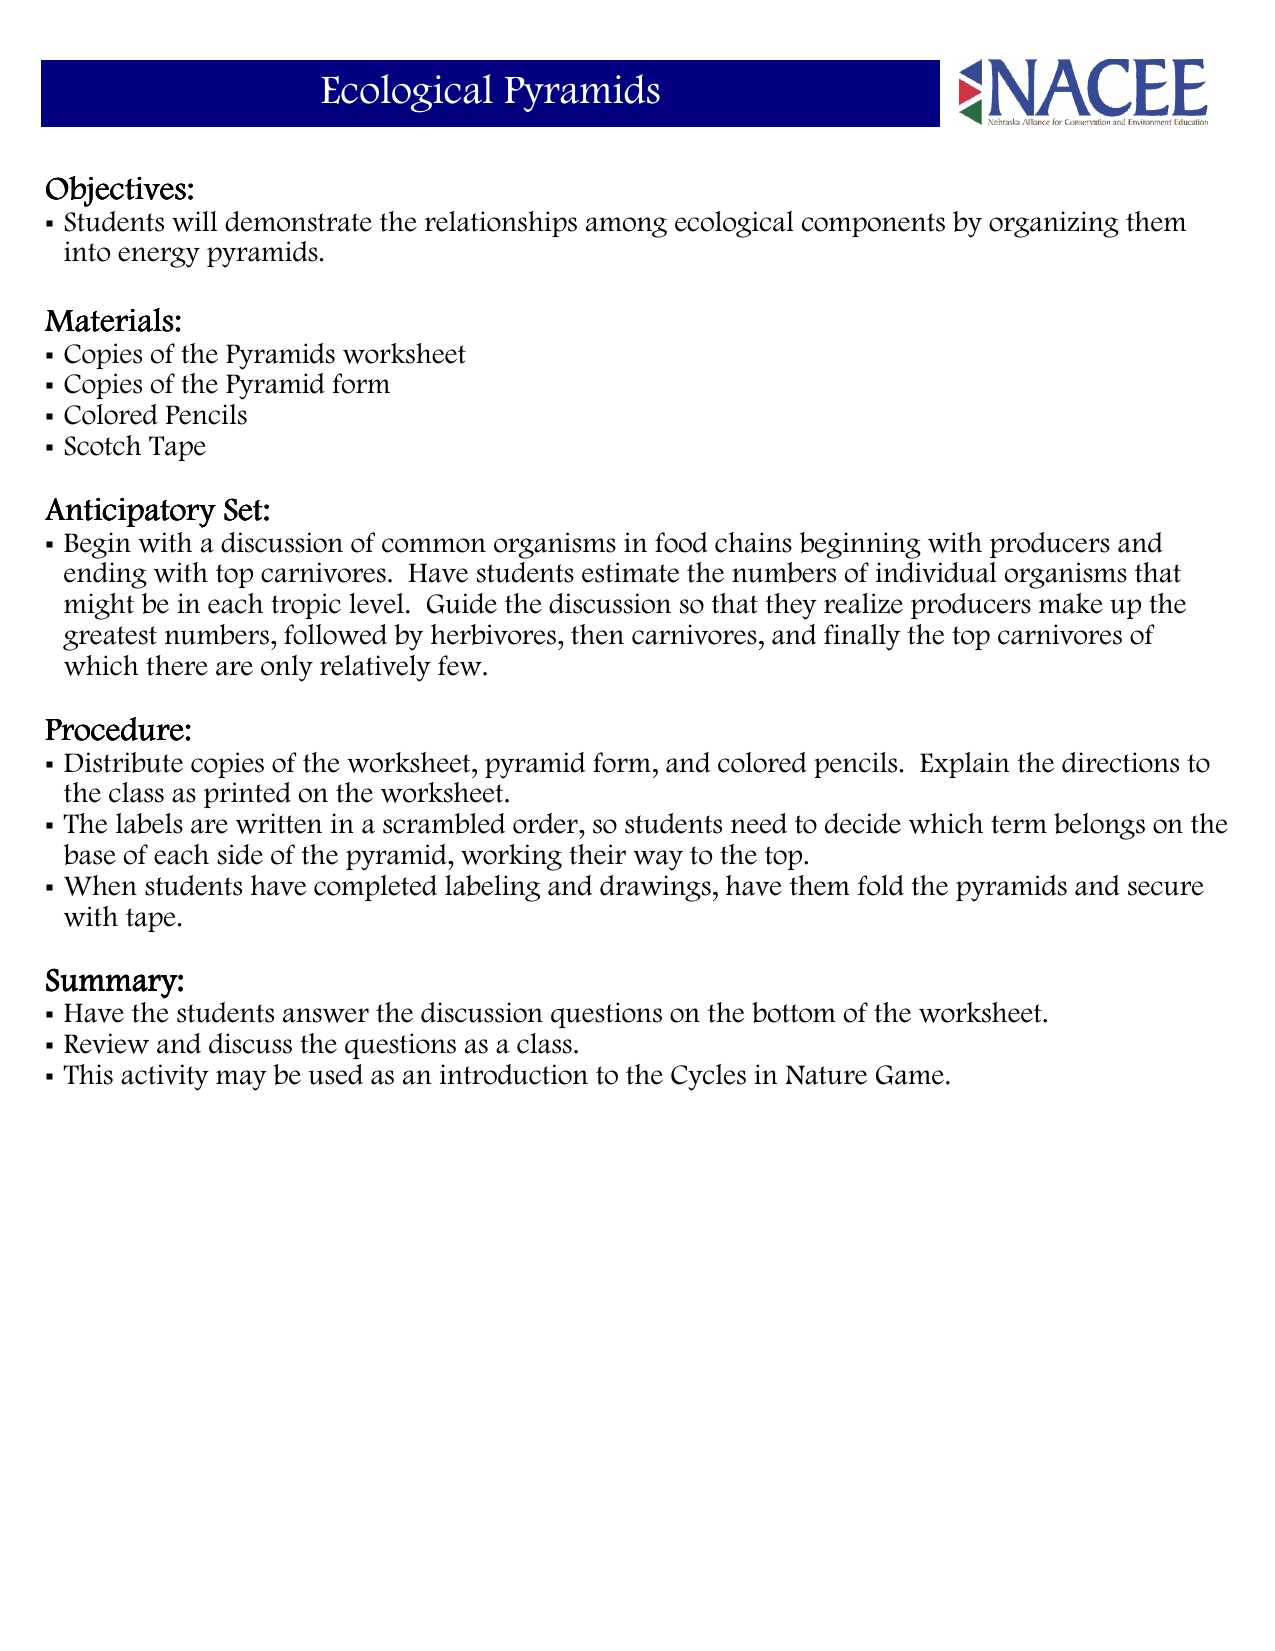 Principles Of Ecology Worksheet Answers and High School Biology Ecology Worksheets